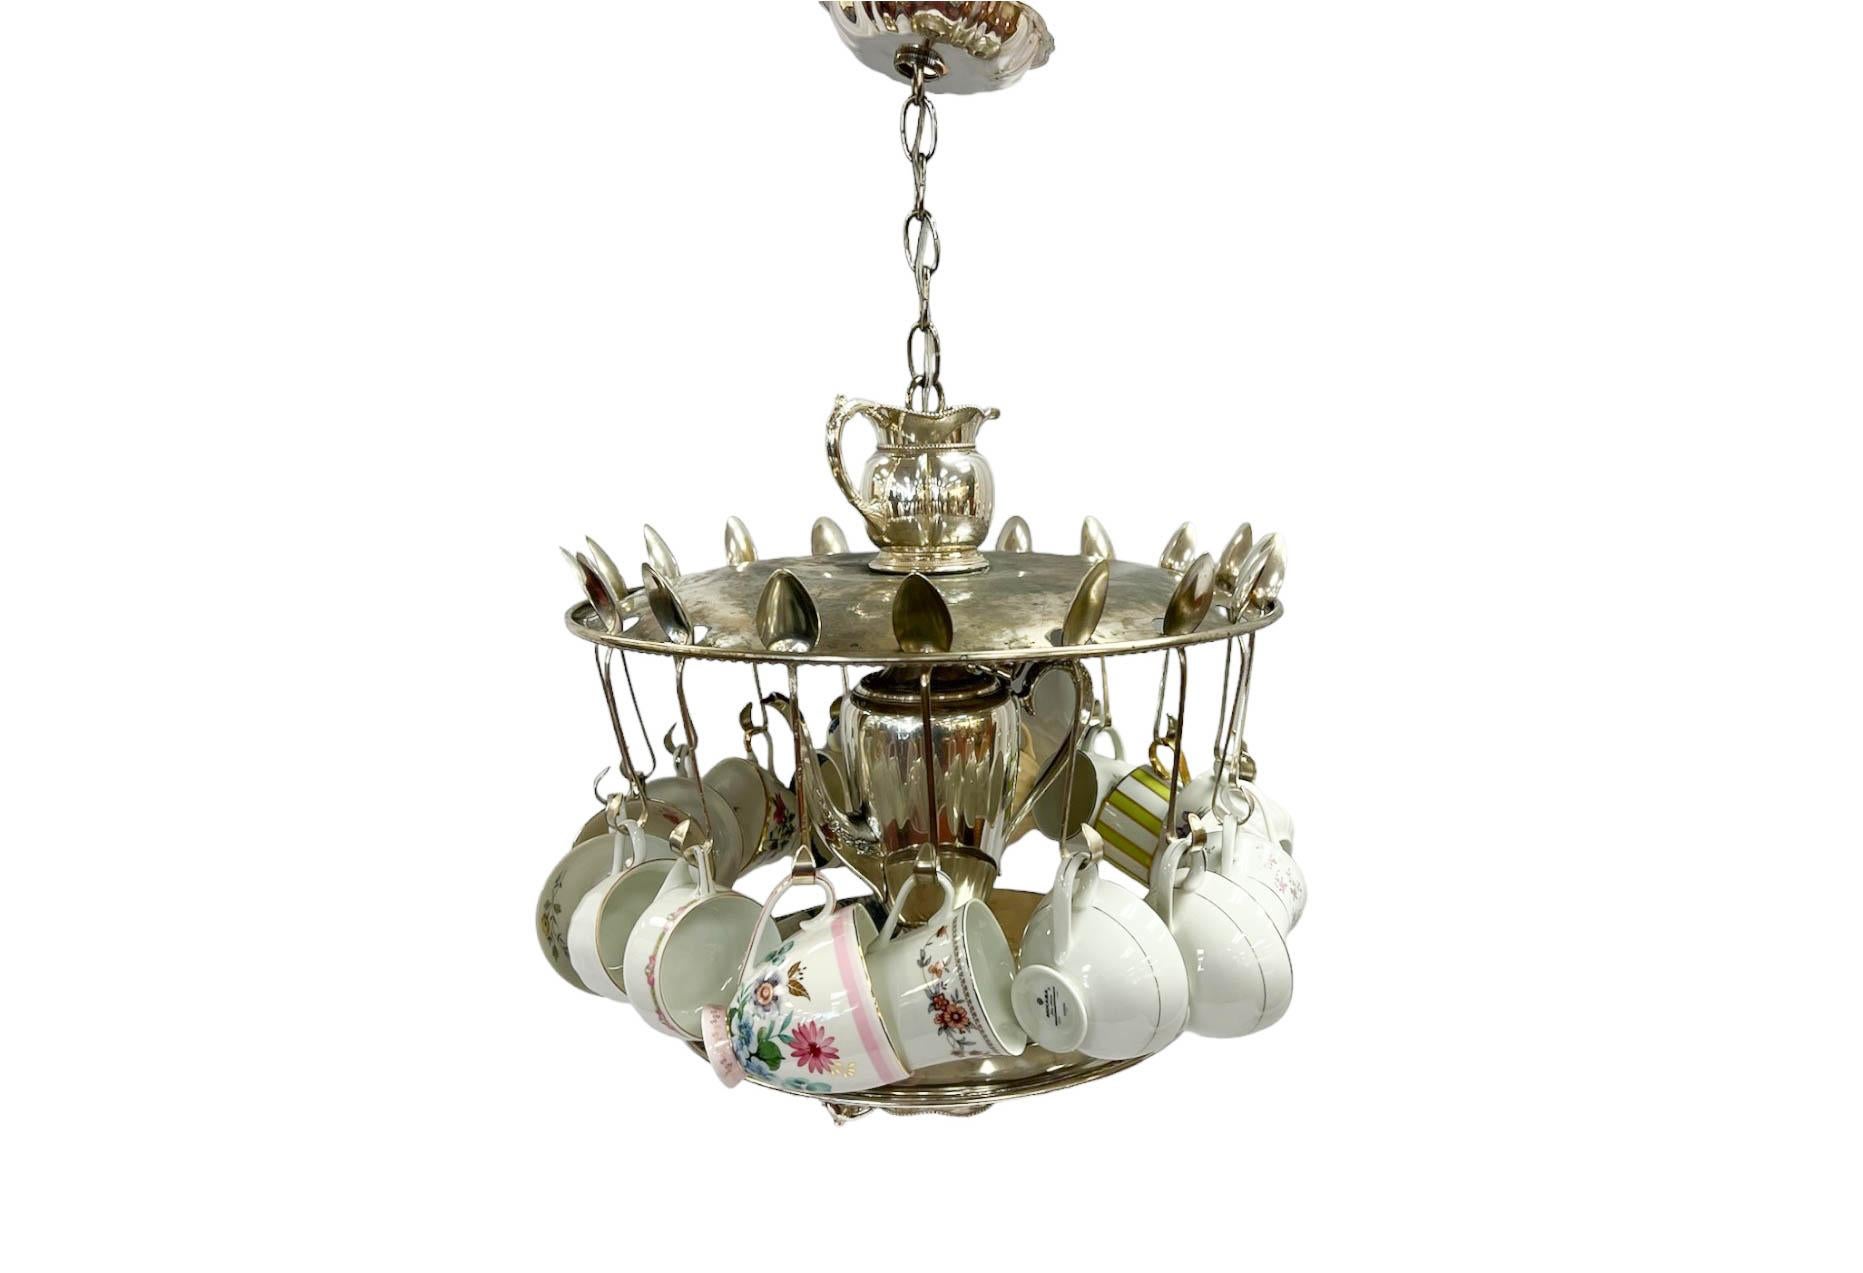 Hand-crafted novelty chandelier made entirely from silver plate service pieces, adorned with an assortment of porcelain teacups. Cups may be switched out to match your decor or rearranged as they hang freely on this fixture. The perfect chandelier